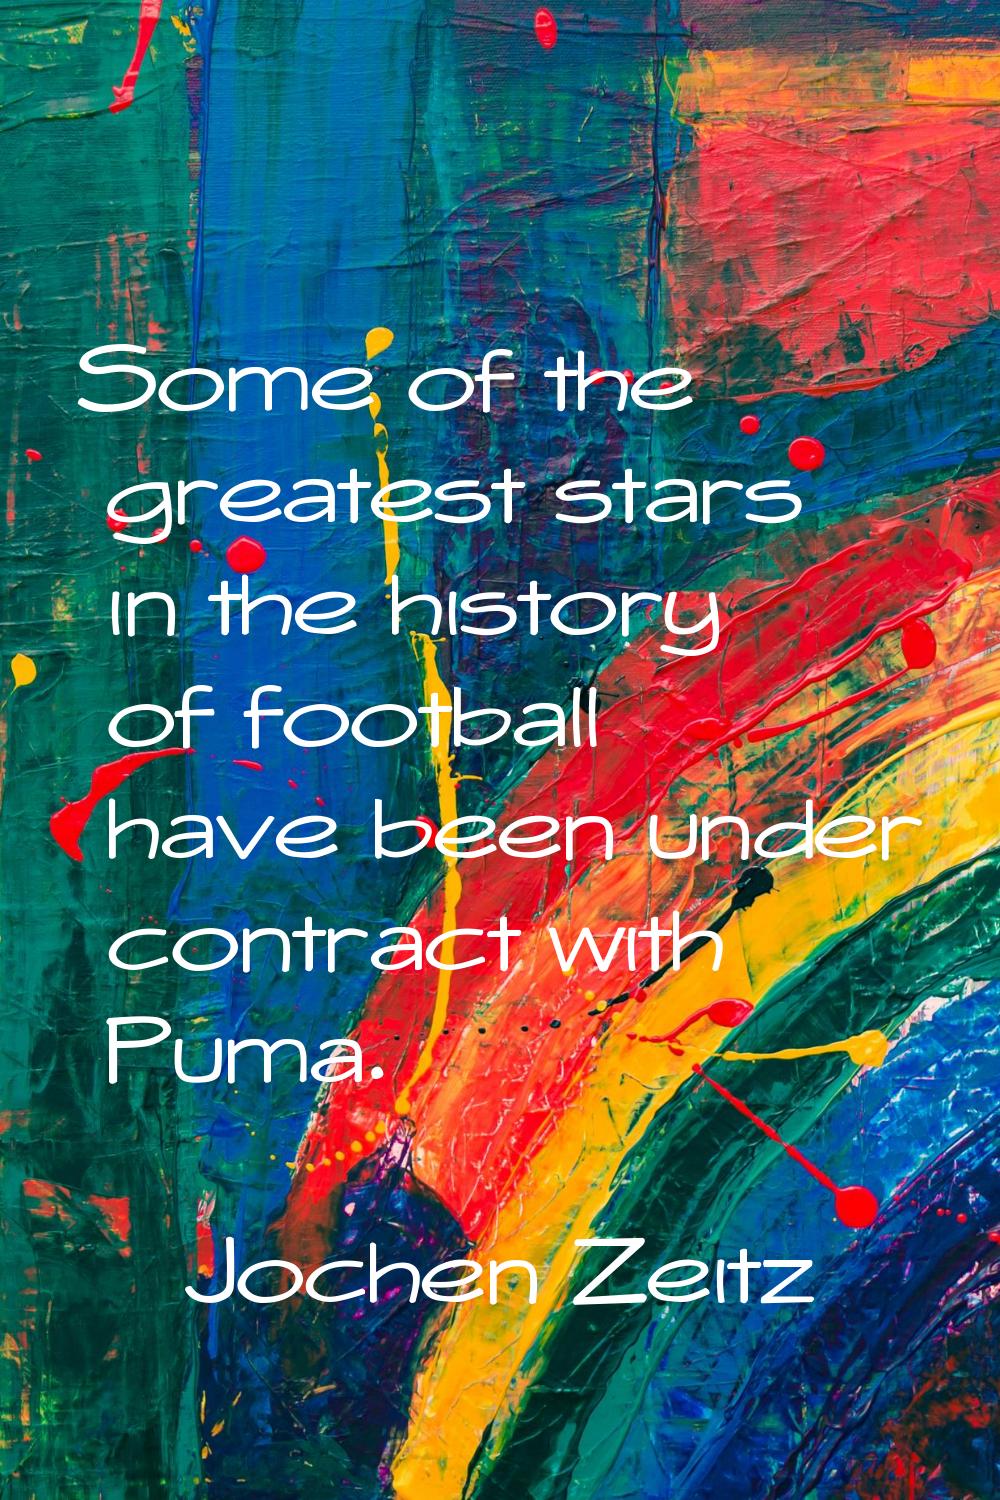 Some of the greatest stars in the history of football have been under contract with Puma.